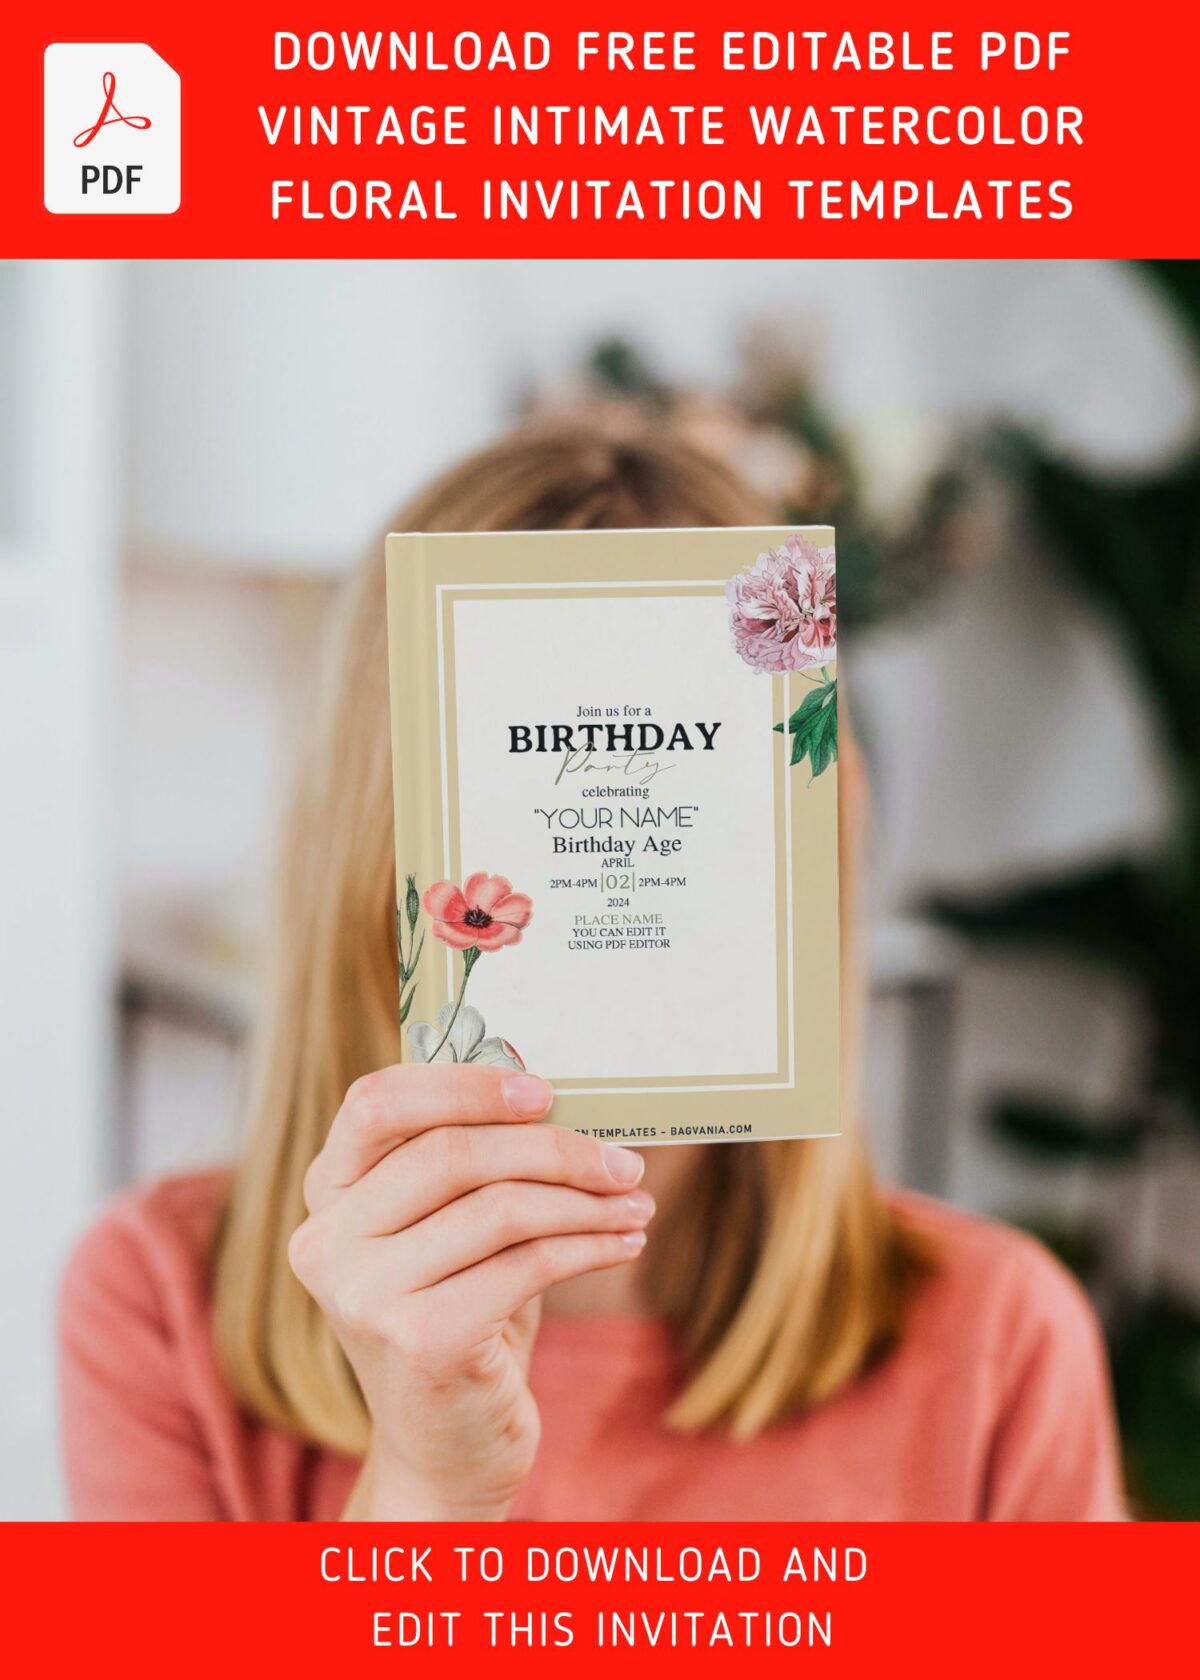 (Free Editable PDF) Intimate Blush Paper Blooms Birthday Invitation Templates with watercolor anemone and daisy